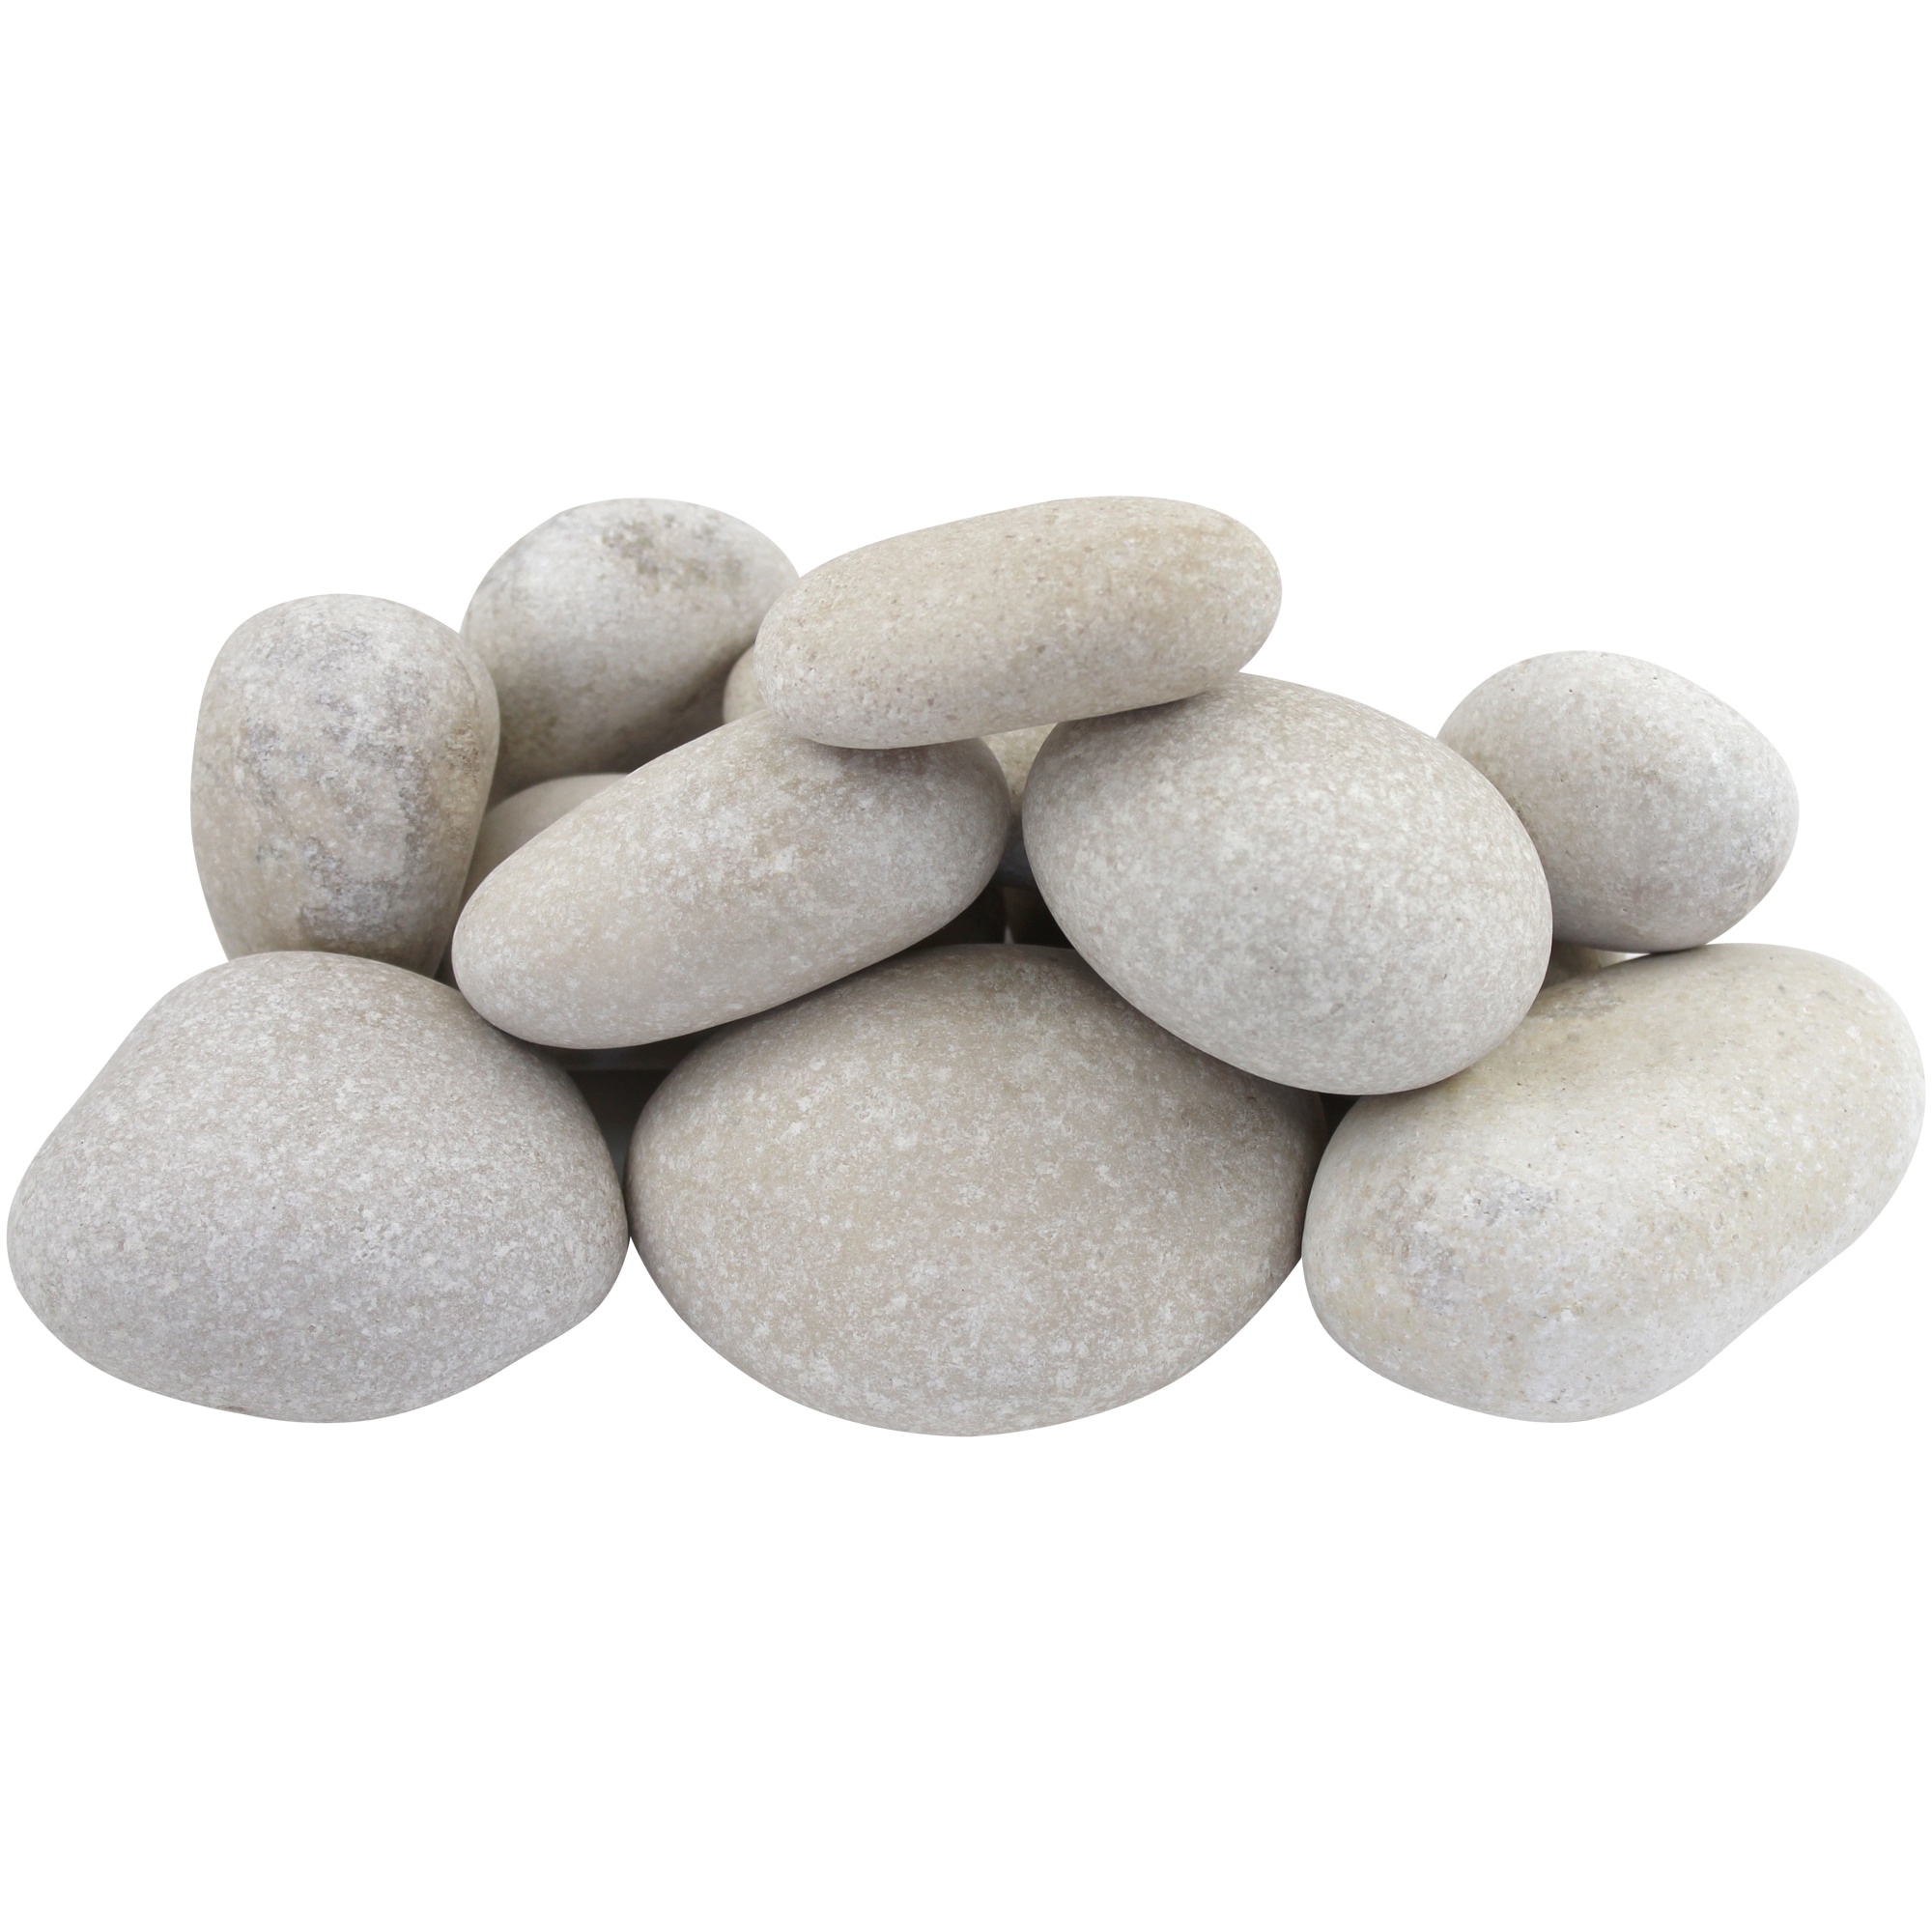 Natural Polished White Pebbles 5lb Smooth White River Rocks Small 5.0 Pounds 